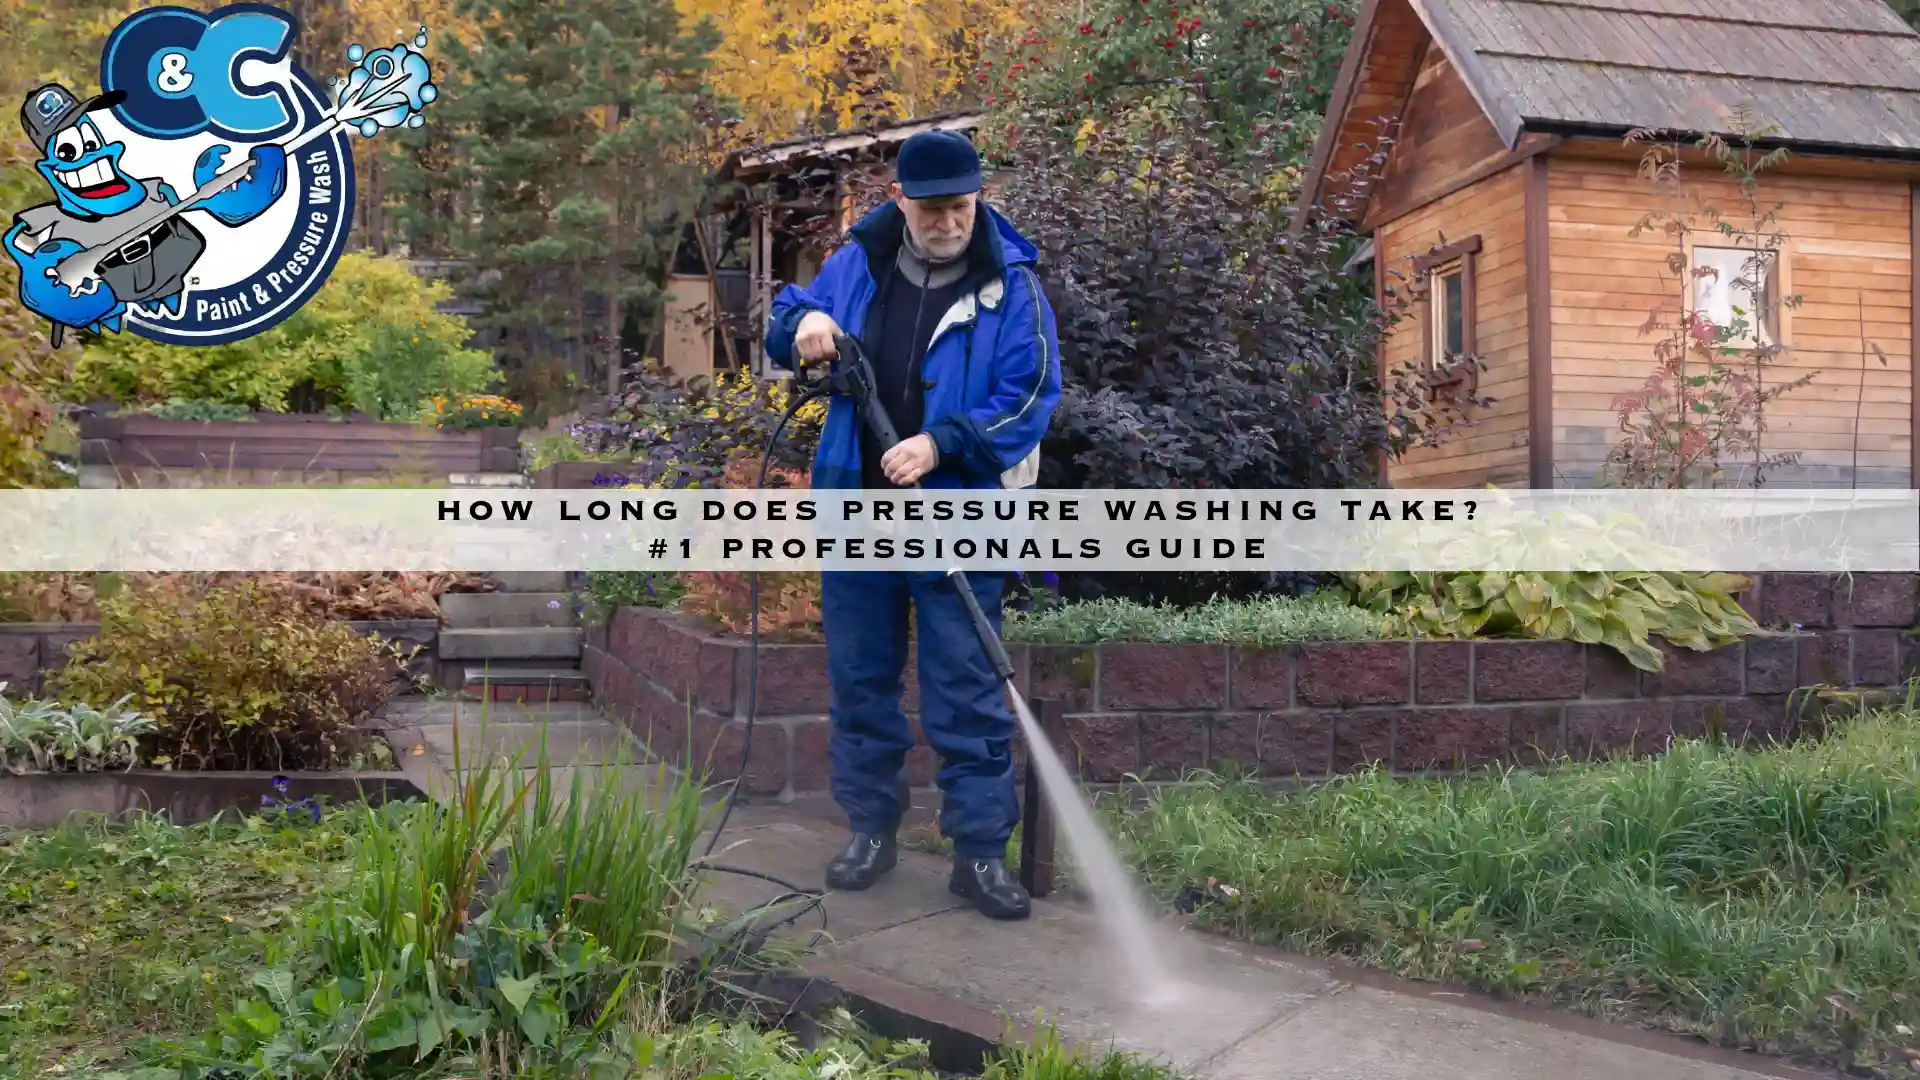 How Long Does Pressure Washing Take? #1 Professionals Guide